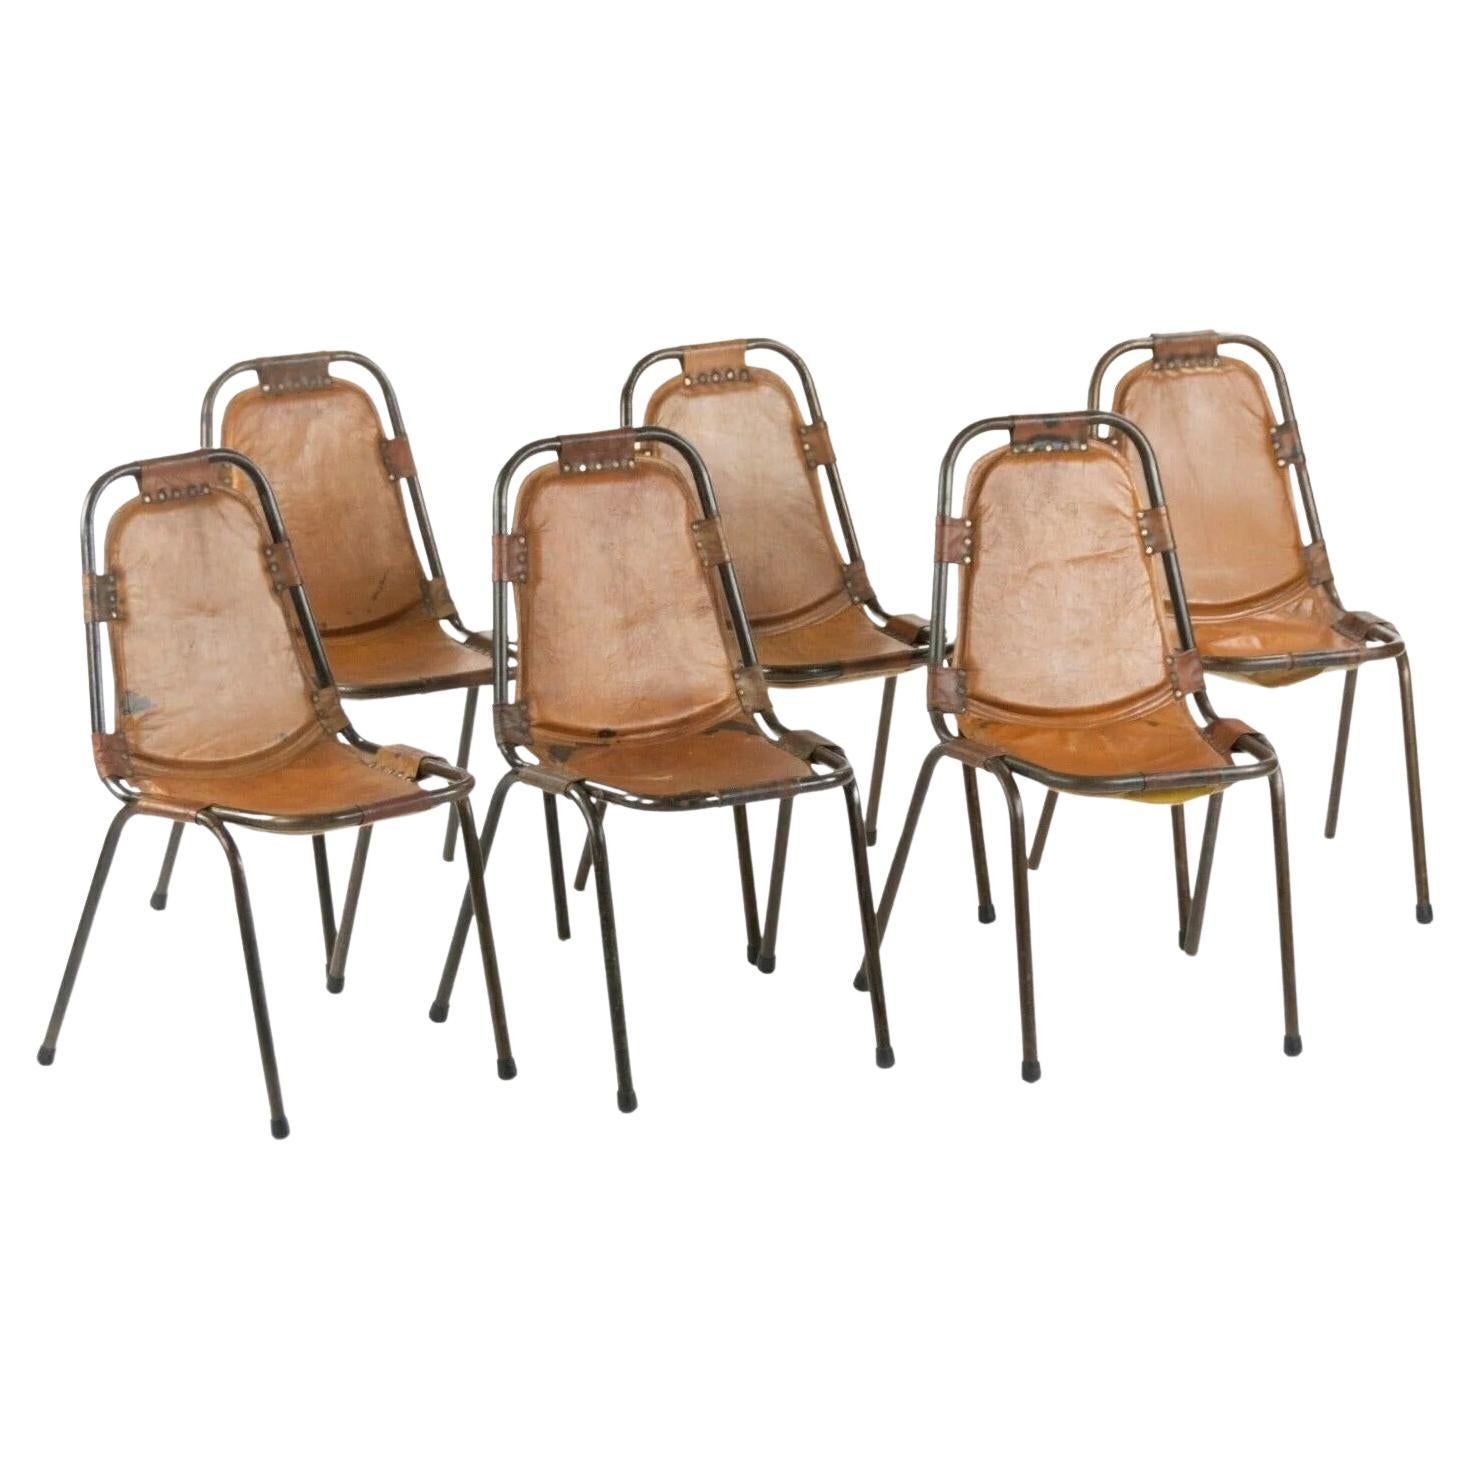 1960s Dal Vera Stacking Chairs for Charlotte Perriand Les Arcs Resort Set of 6 For Sale